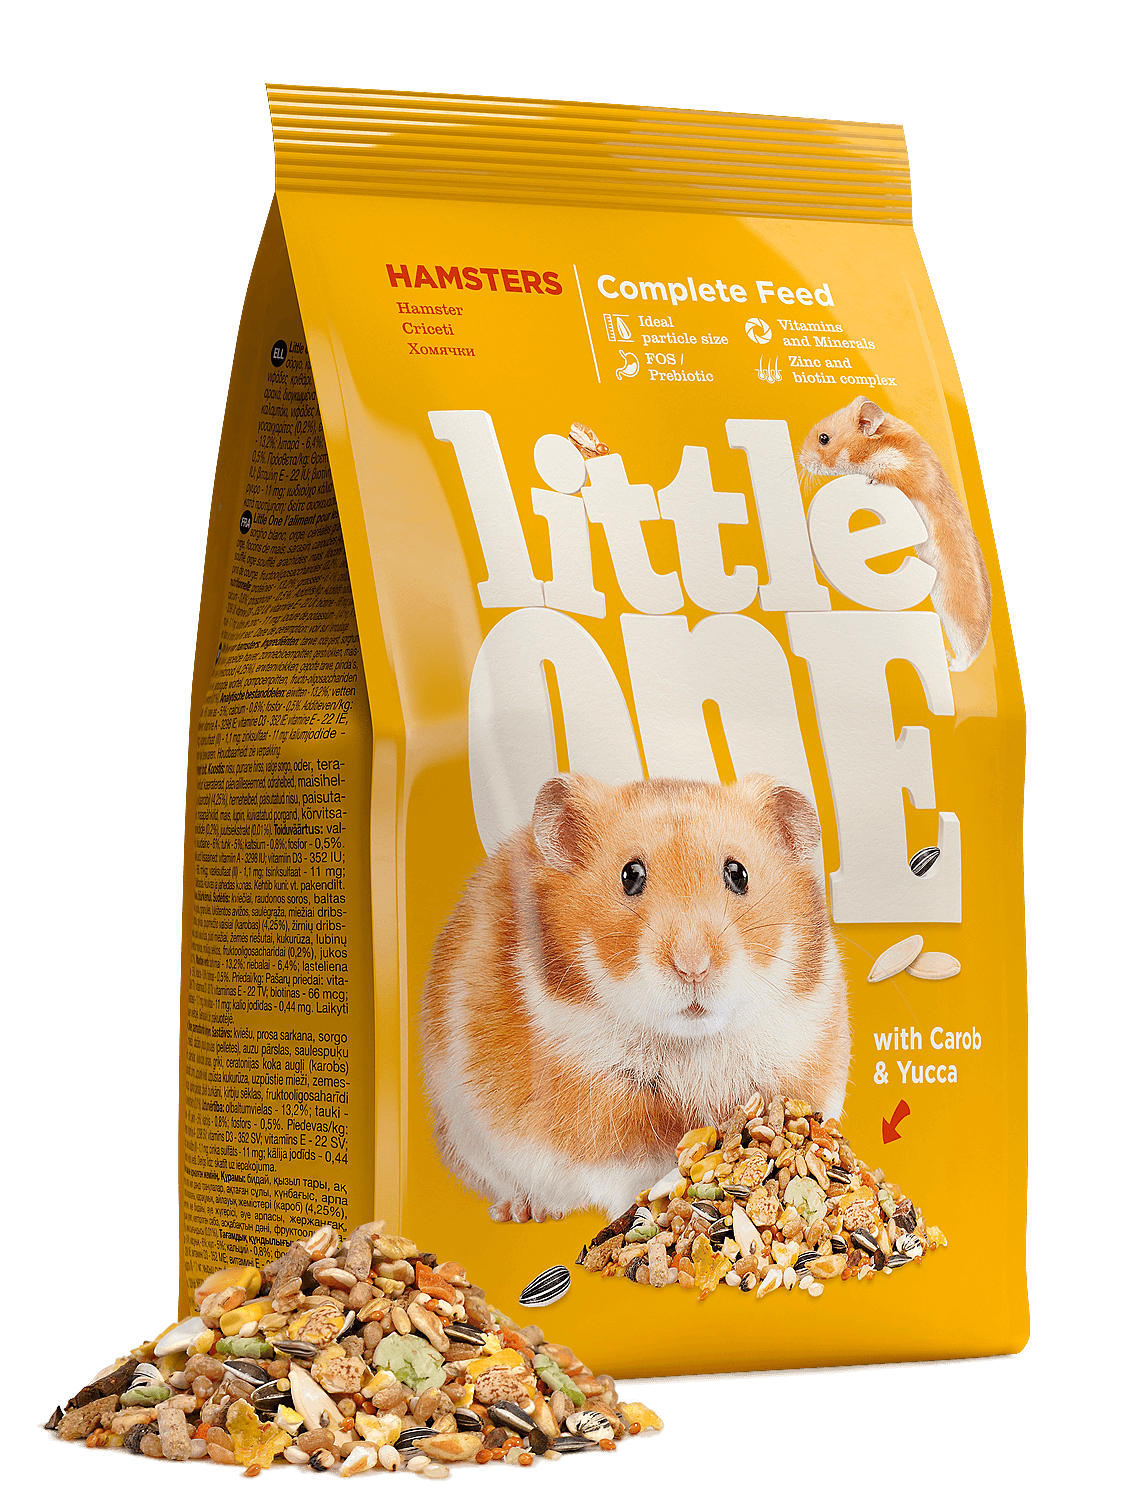 Aliment complet pour hamsters 900g